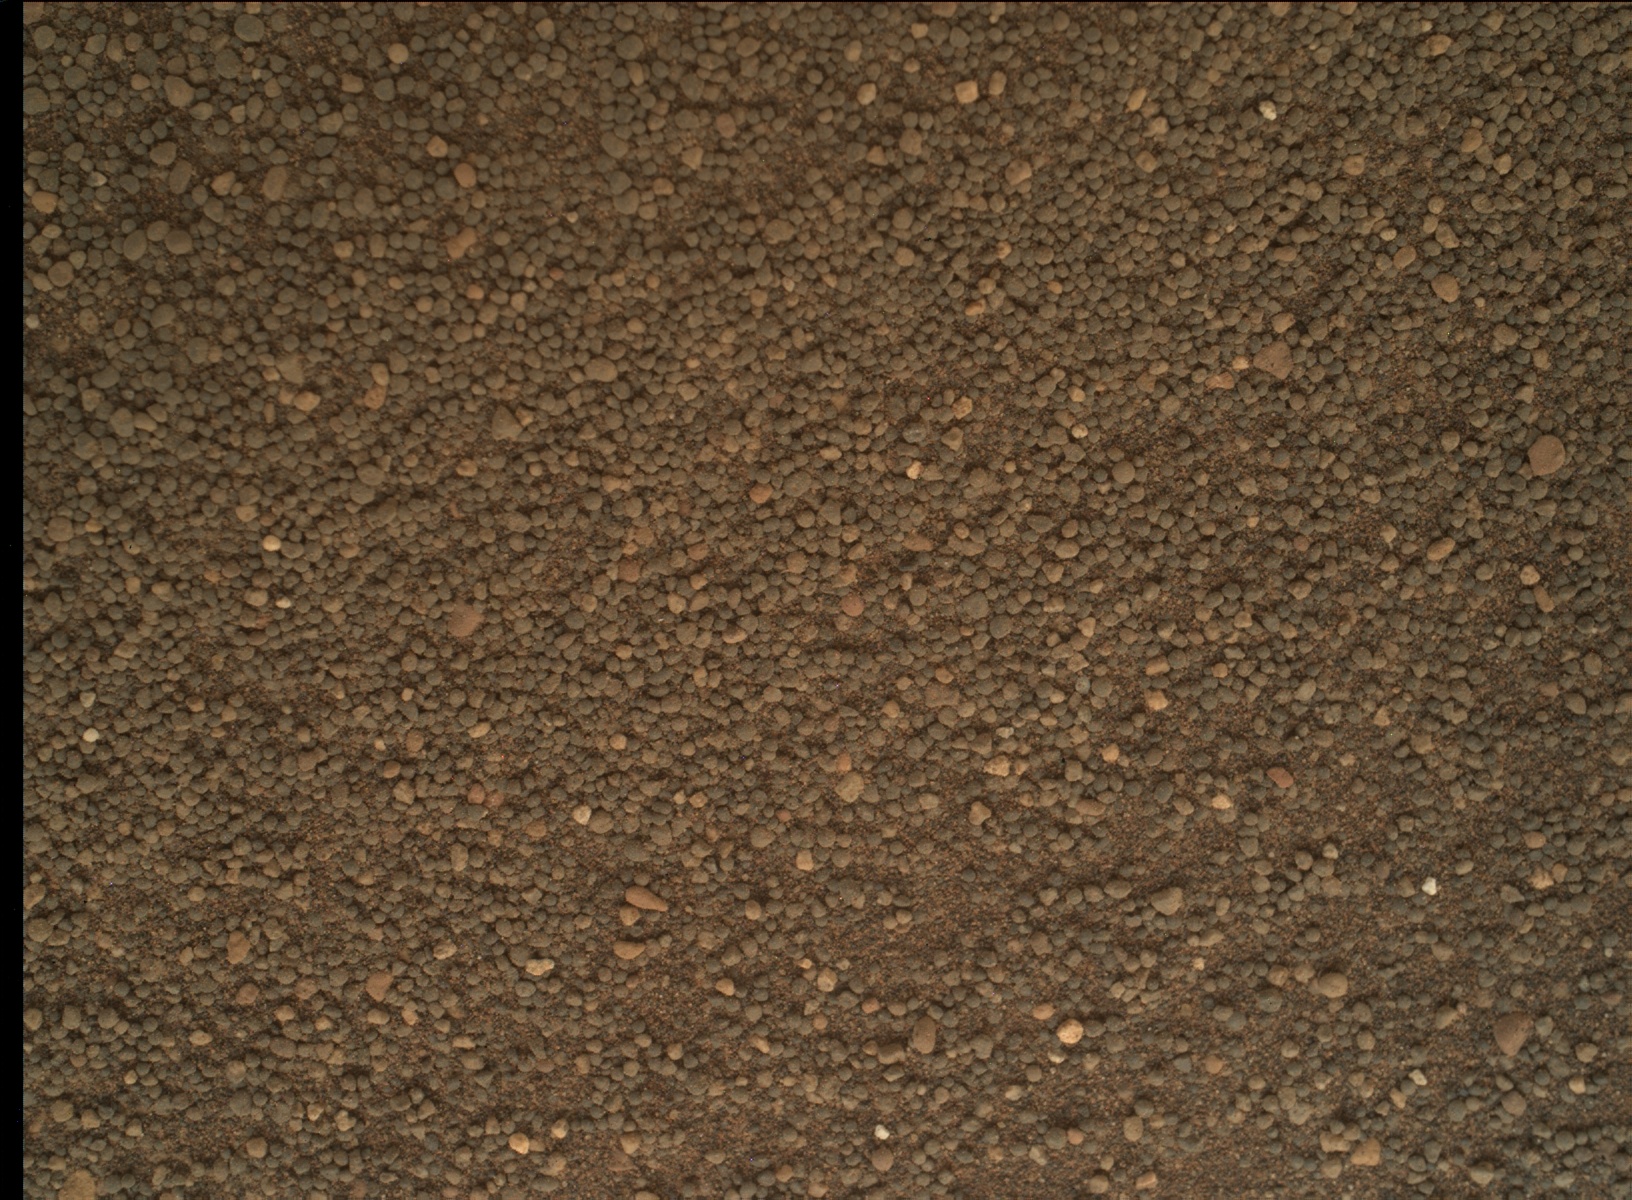 Nasa's Mars rover Curiosity acquired this image using its Mars Hand Lens Imager (MAHLI) on Sol 1688